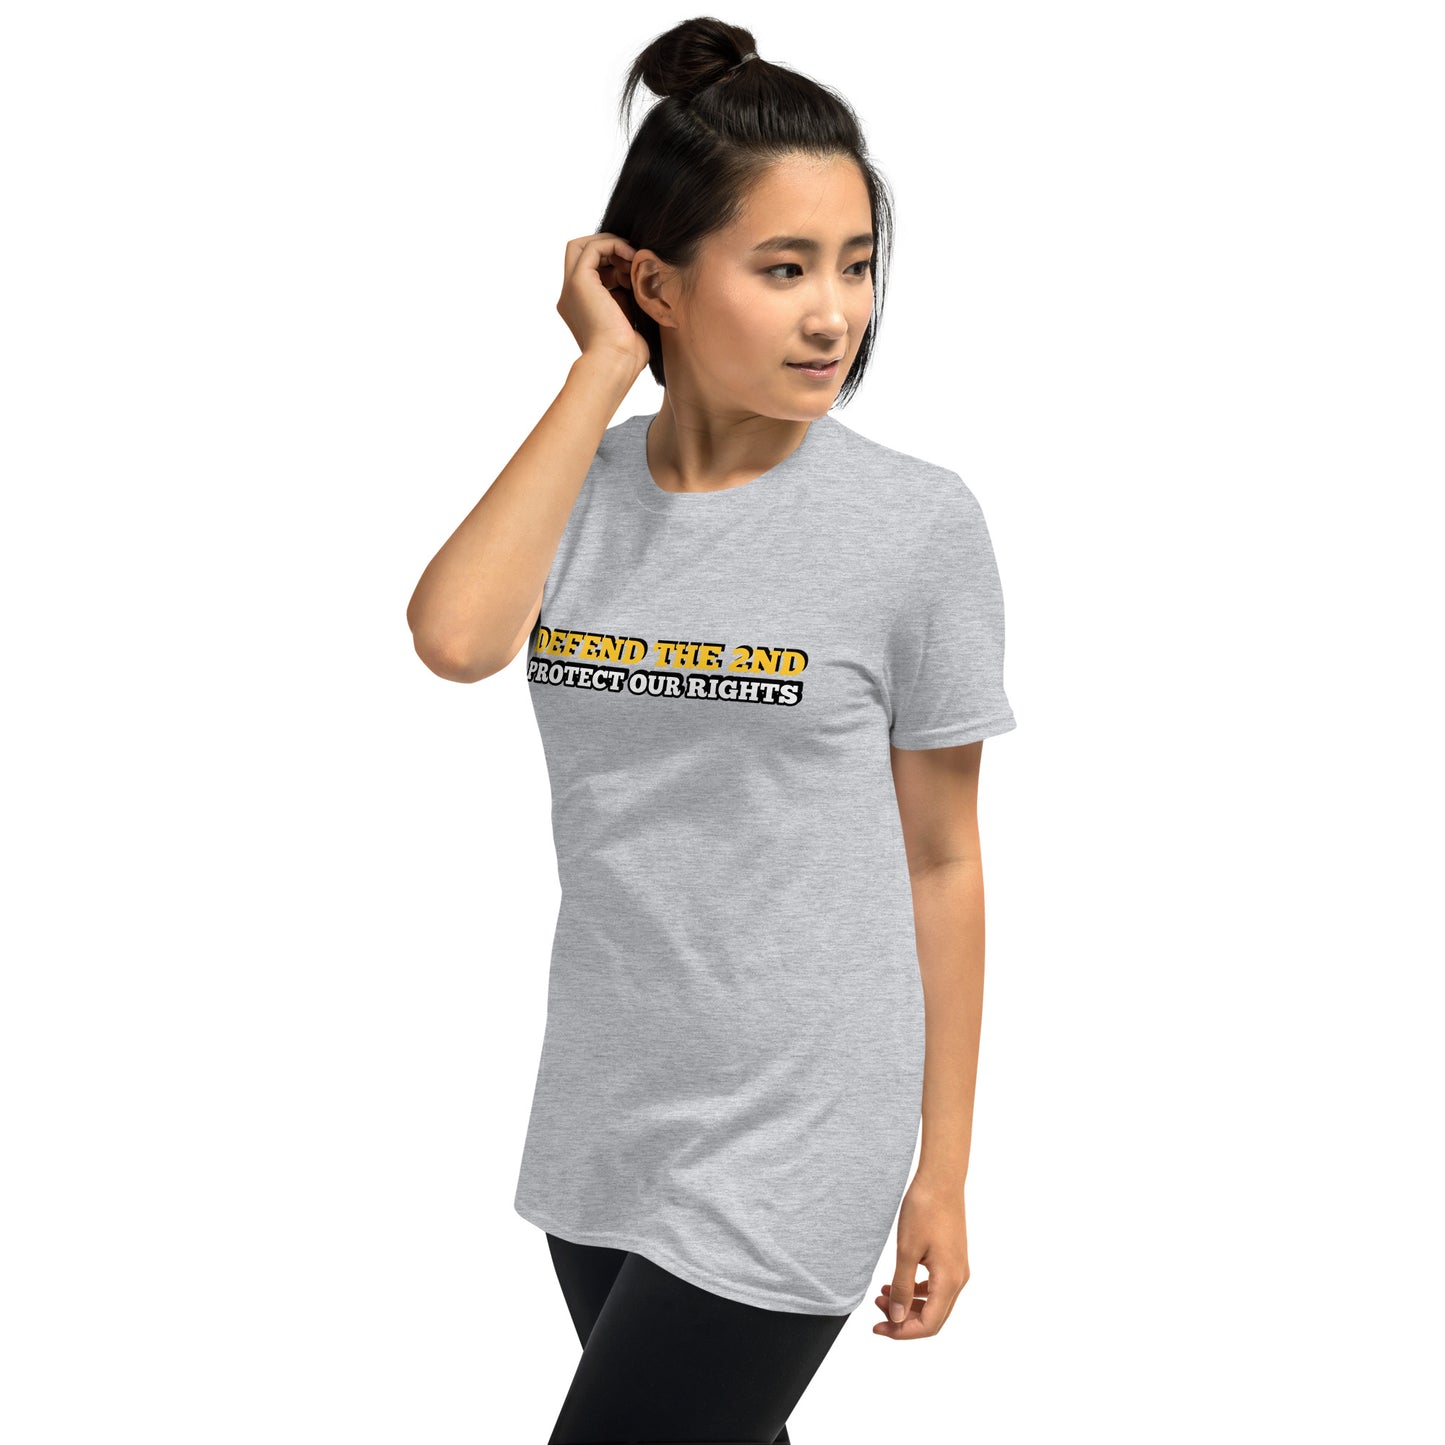 Stand Up for Your Rights with Our Defend the 2nd Amendment Unisex Shirt